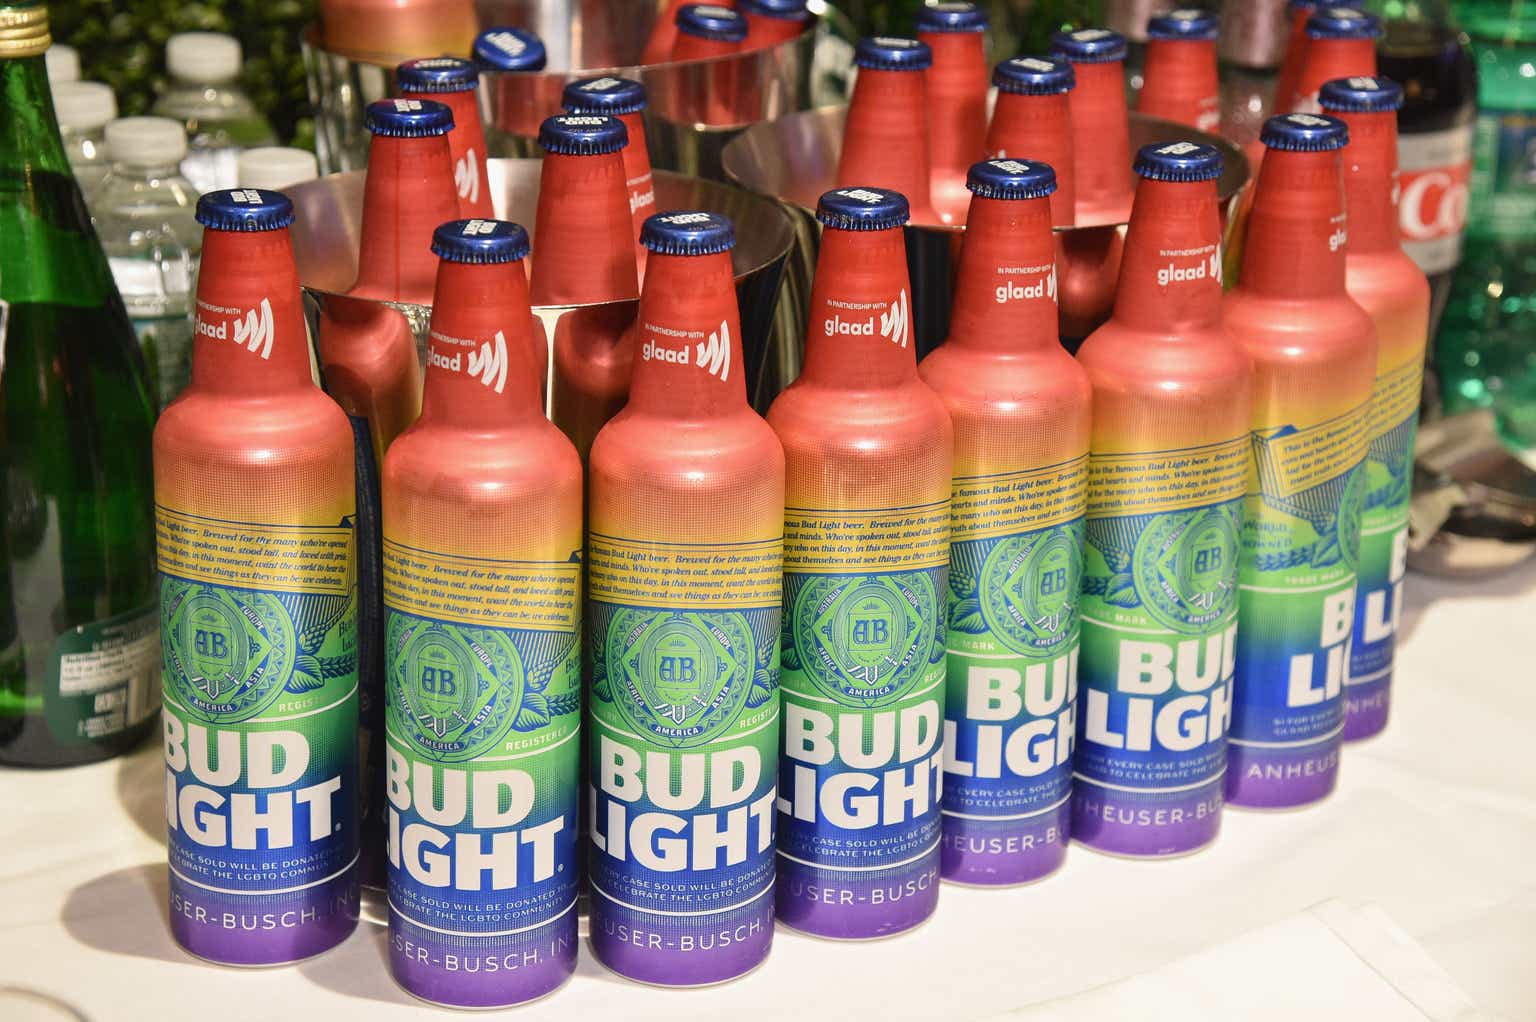 Bud Light brewer confident it can win back US drinkers